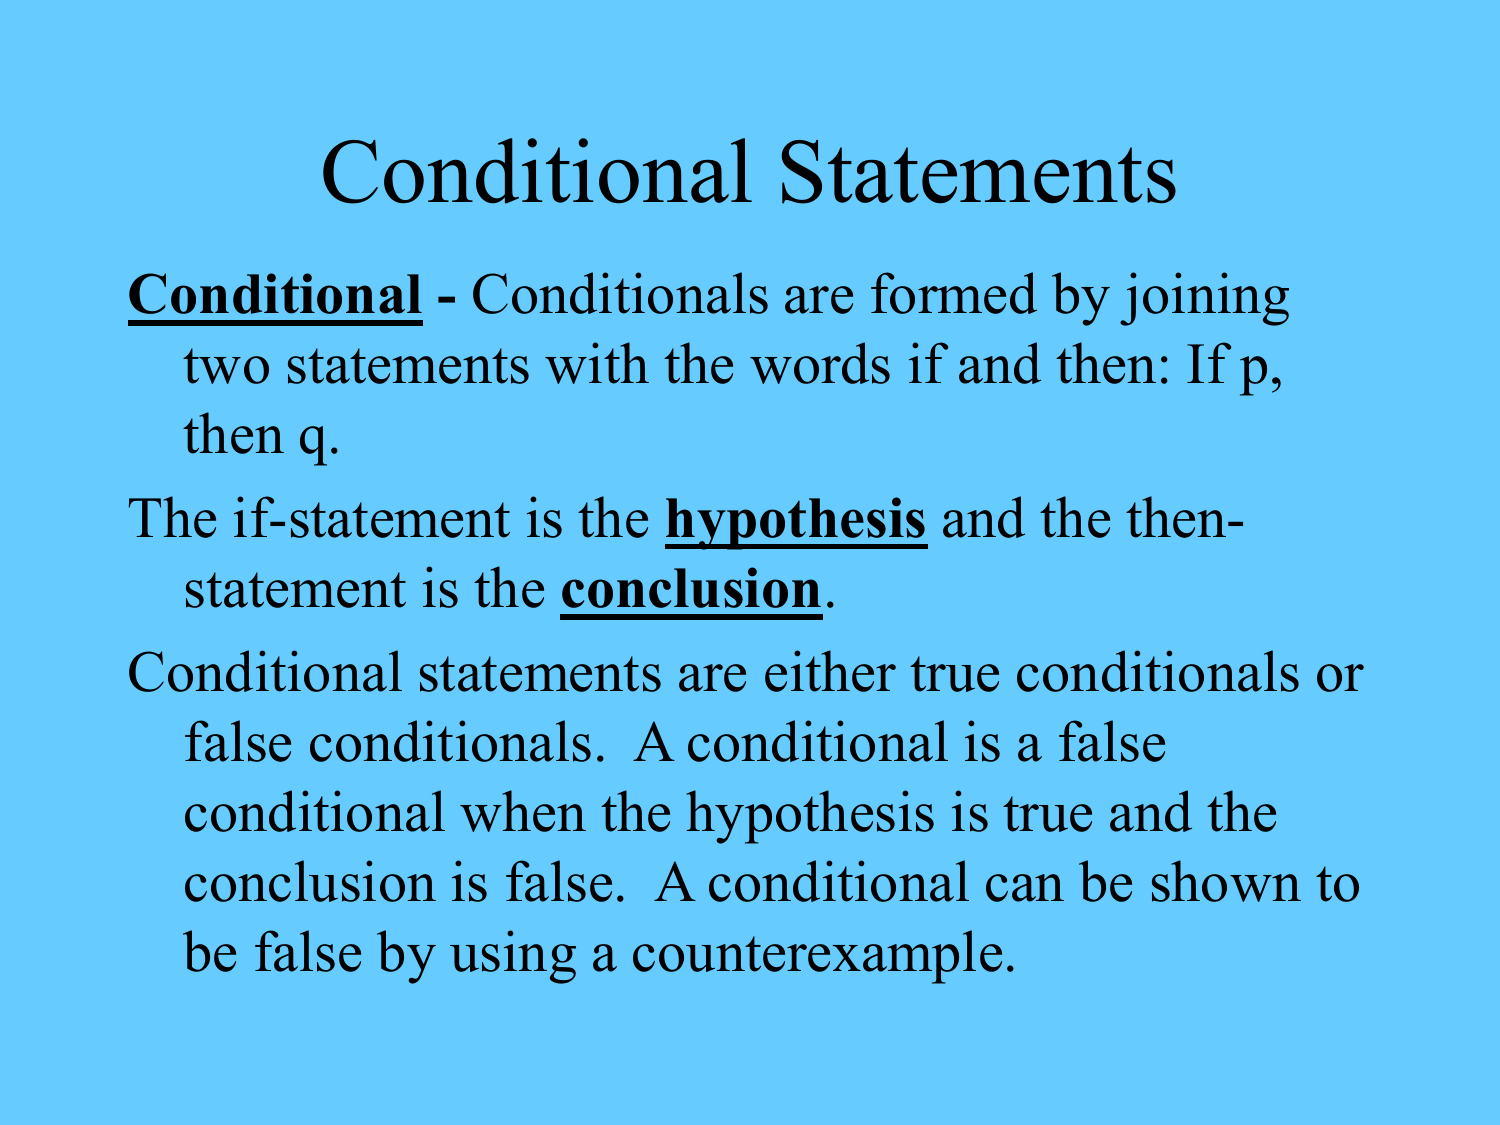 what is the hypothesis in a conditional statement